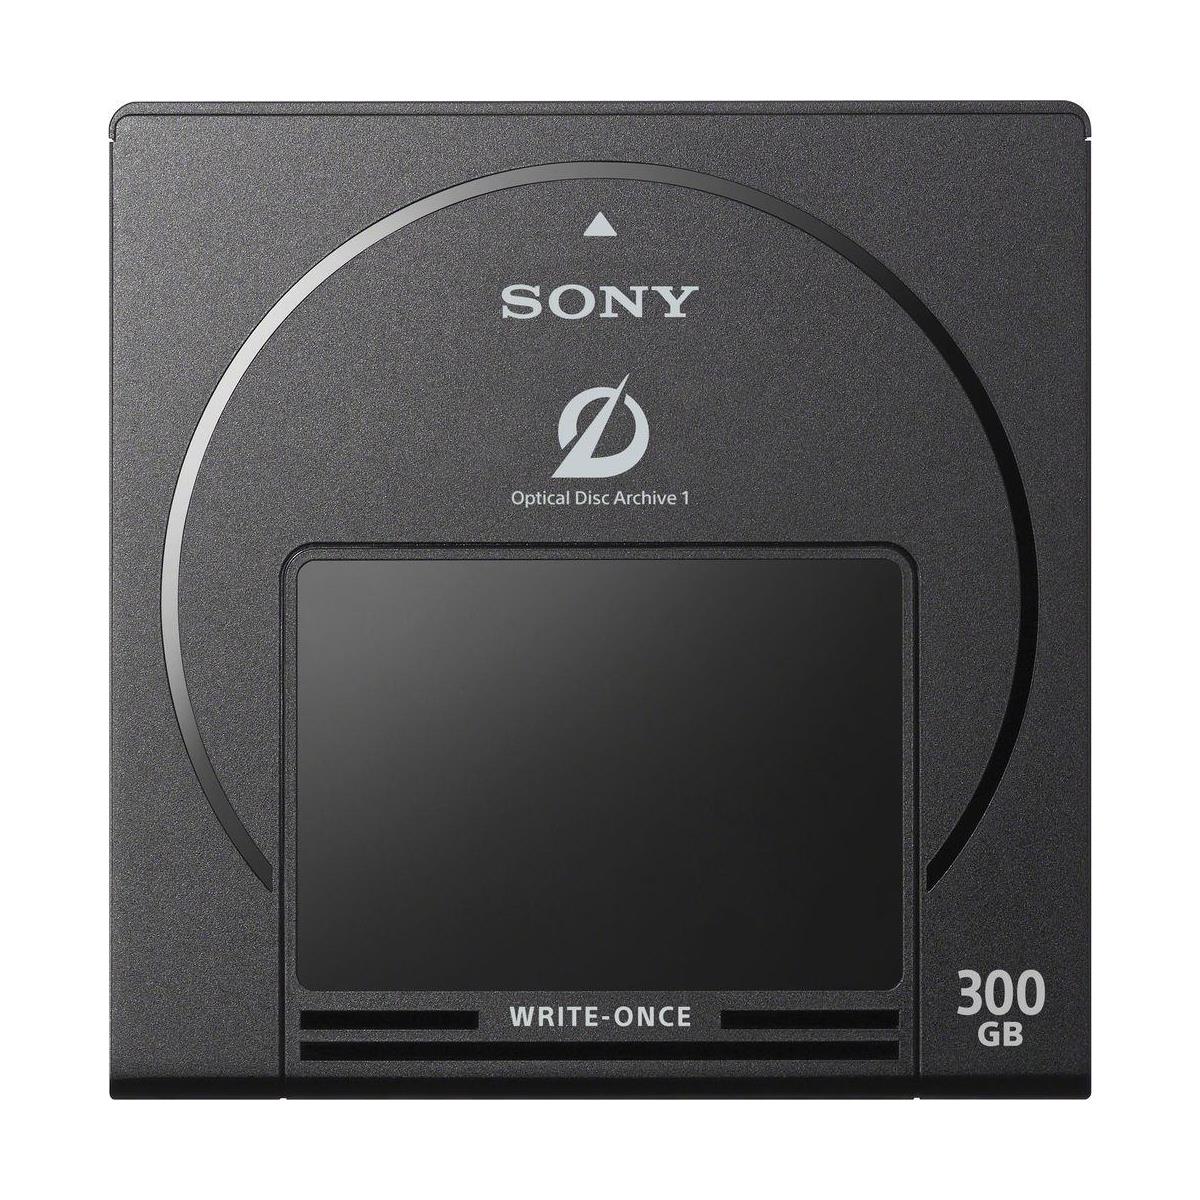 Image of Sony 300GB Write-Once Cartridge for ODS-D55U and ODS-D77U Optical Disc